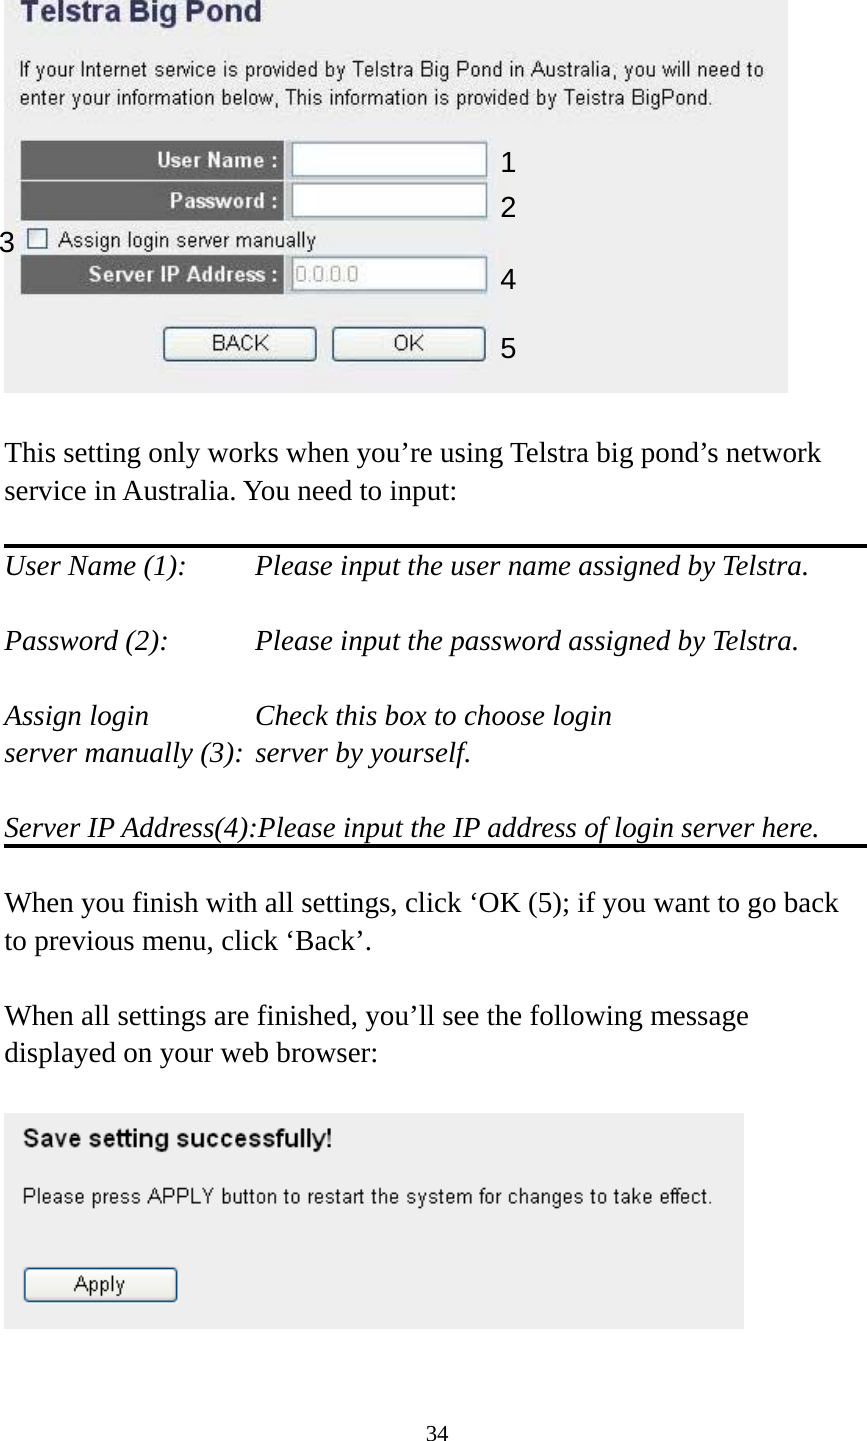 34    This setting only works when you’re using Telstra big pond’s network service in Australia. You need to input:  User Name (1):     Please input the user name assigned by Telstra.  Password (2):      Please input the password assigned by Telstra.  Assign login          Check this box to choose login server manually (3): server by yourself.  Server IP Address(4):Please input the IP address of login server here.  When you finish with all settings, click ‘OK (5); if you want to go back to previous menu, click ‘Back’.  When all settings are finished, you’ll see the following message displayed on your web browser:    123 4 5 